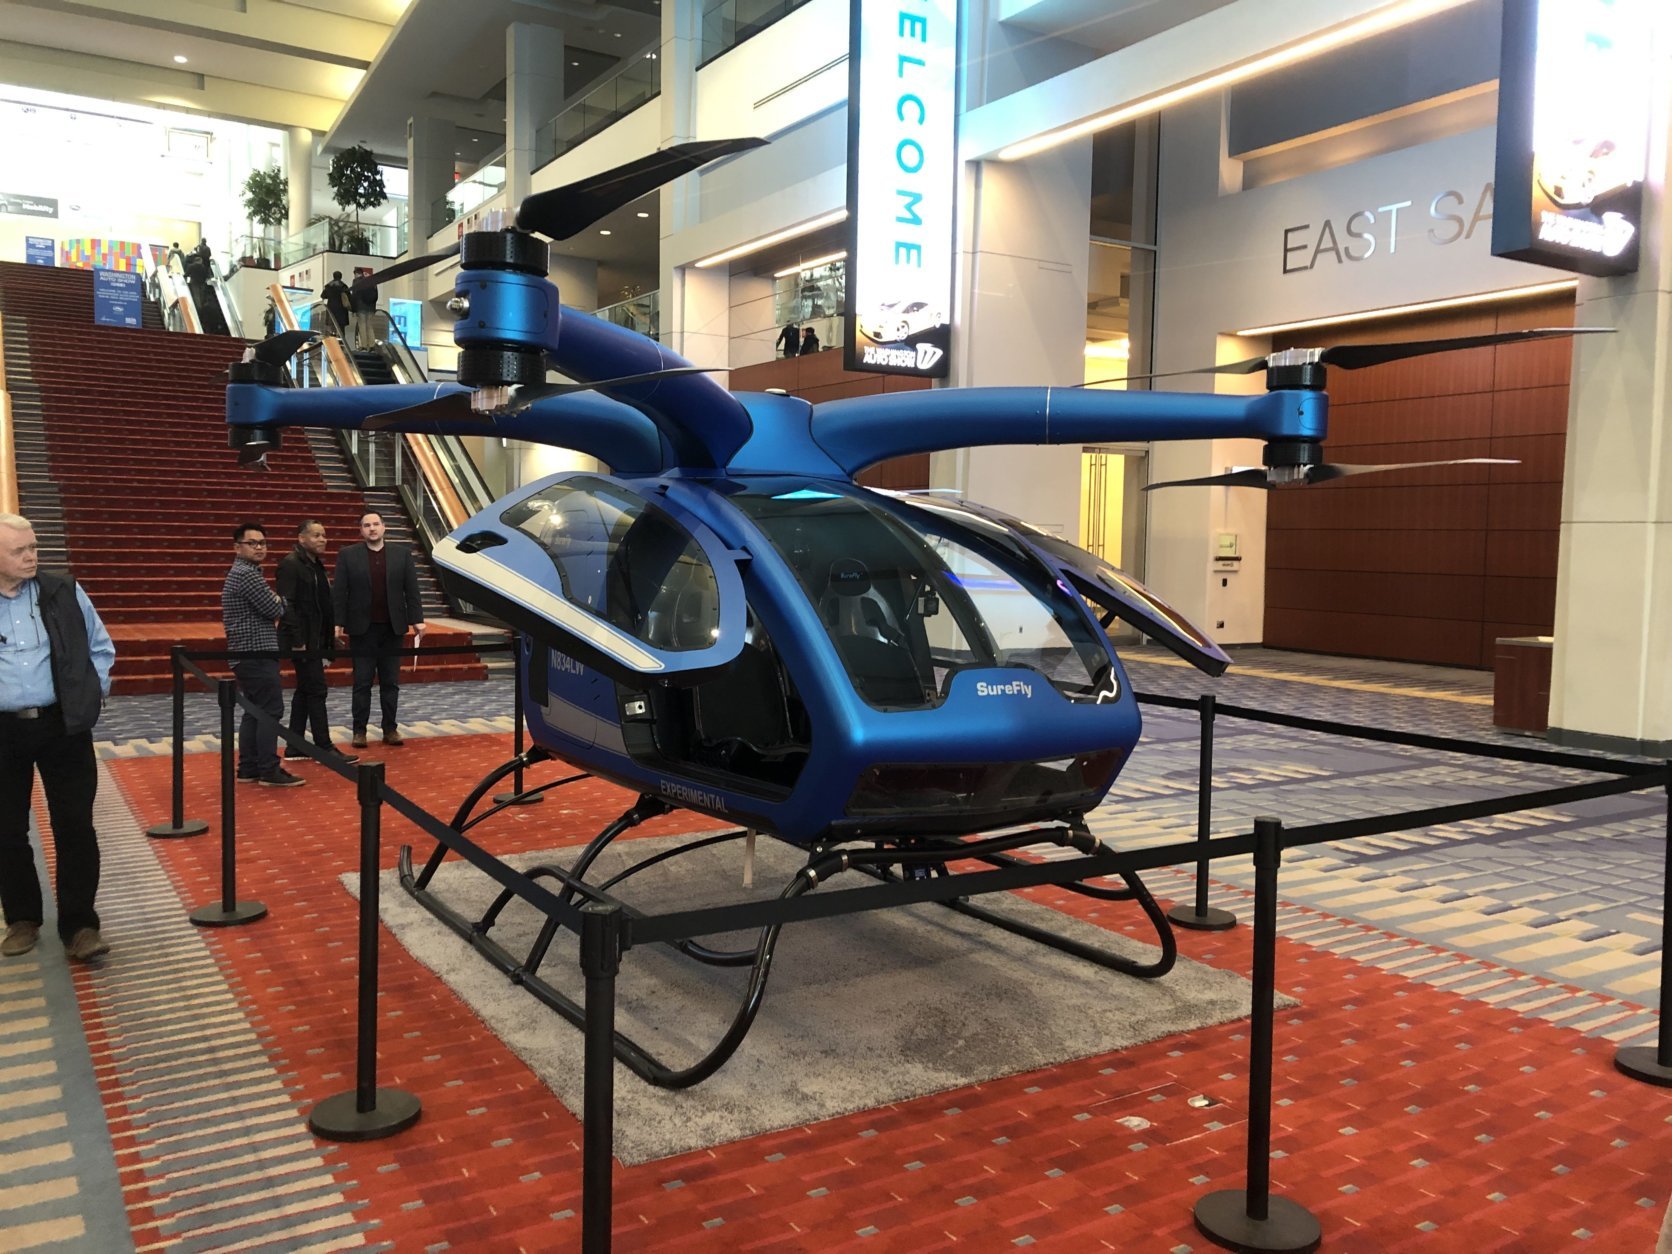 Surefly’s newest electric helicopter looks like an over-sized drone and is being dubbed the “flying car” of tomorrow.(WTOP/Mike Murillo)